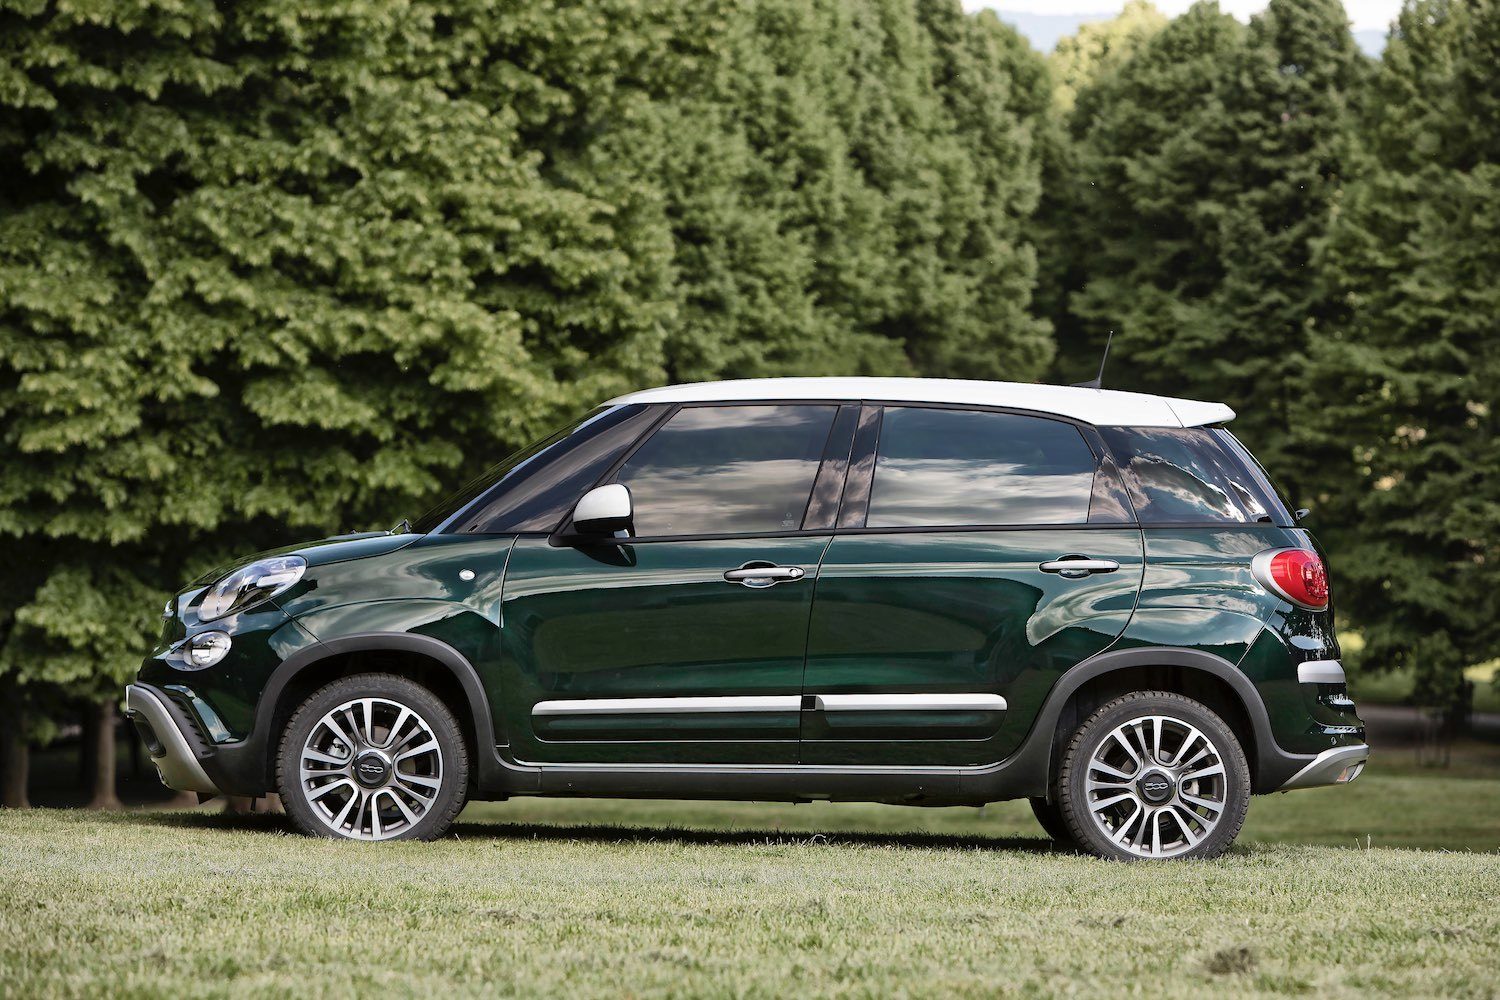 Tim Barnes-Clay reviews the New Fiat 500L from the first drive in Italy 15